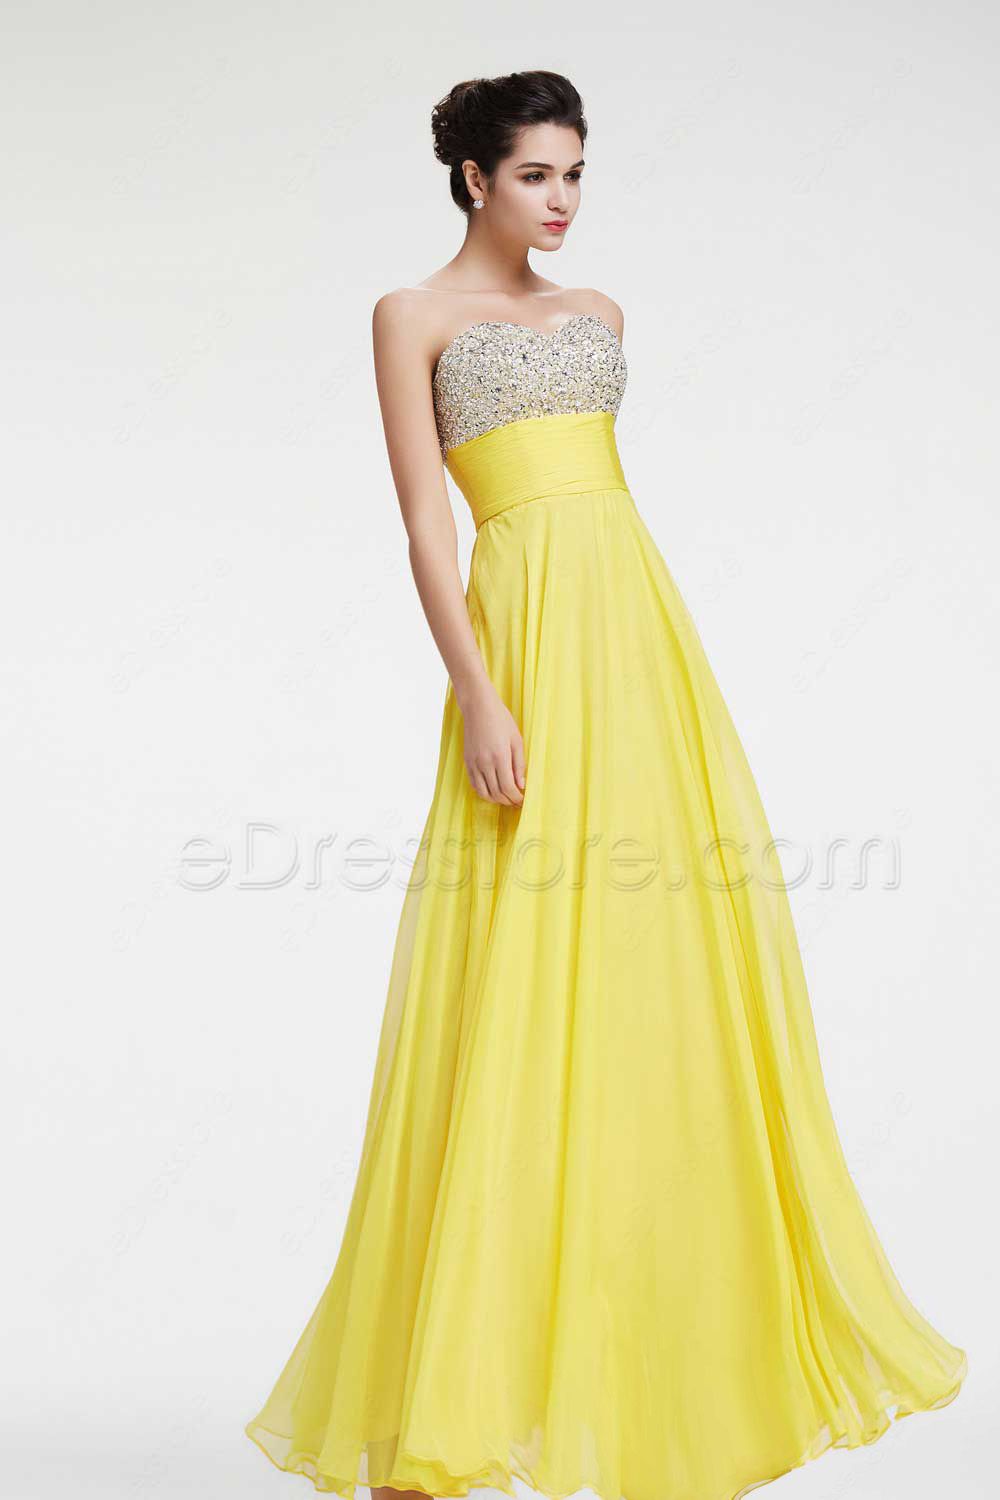 Yellow Beaded Sparkly Prom Dresses Flowing Pageant Dresses | eDresstore